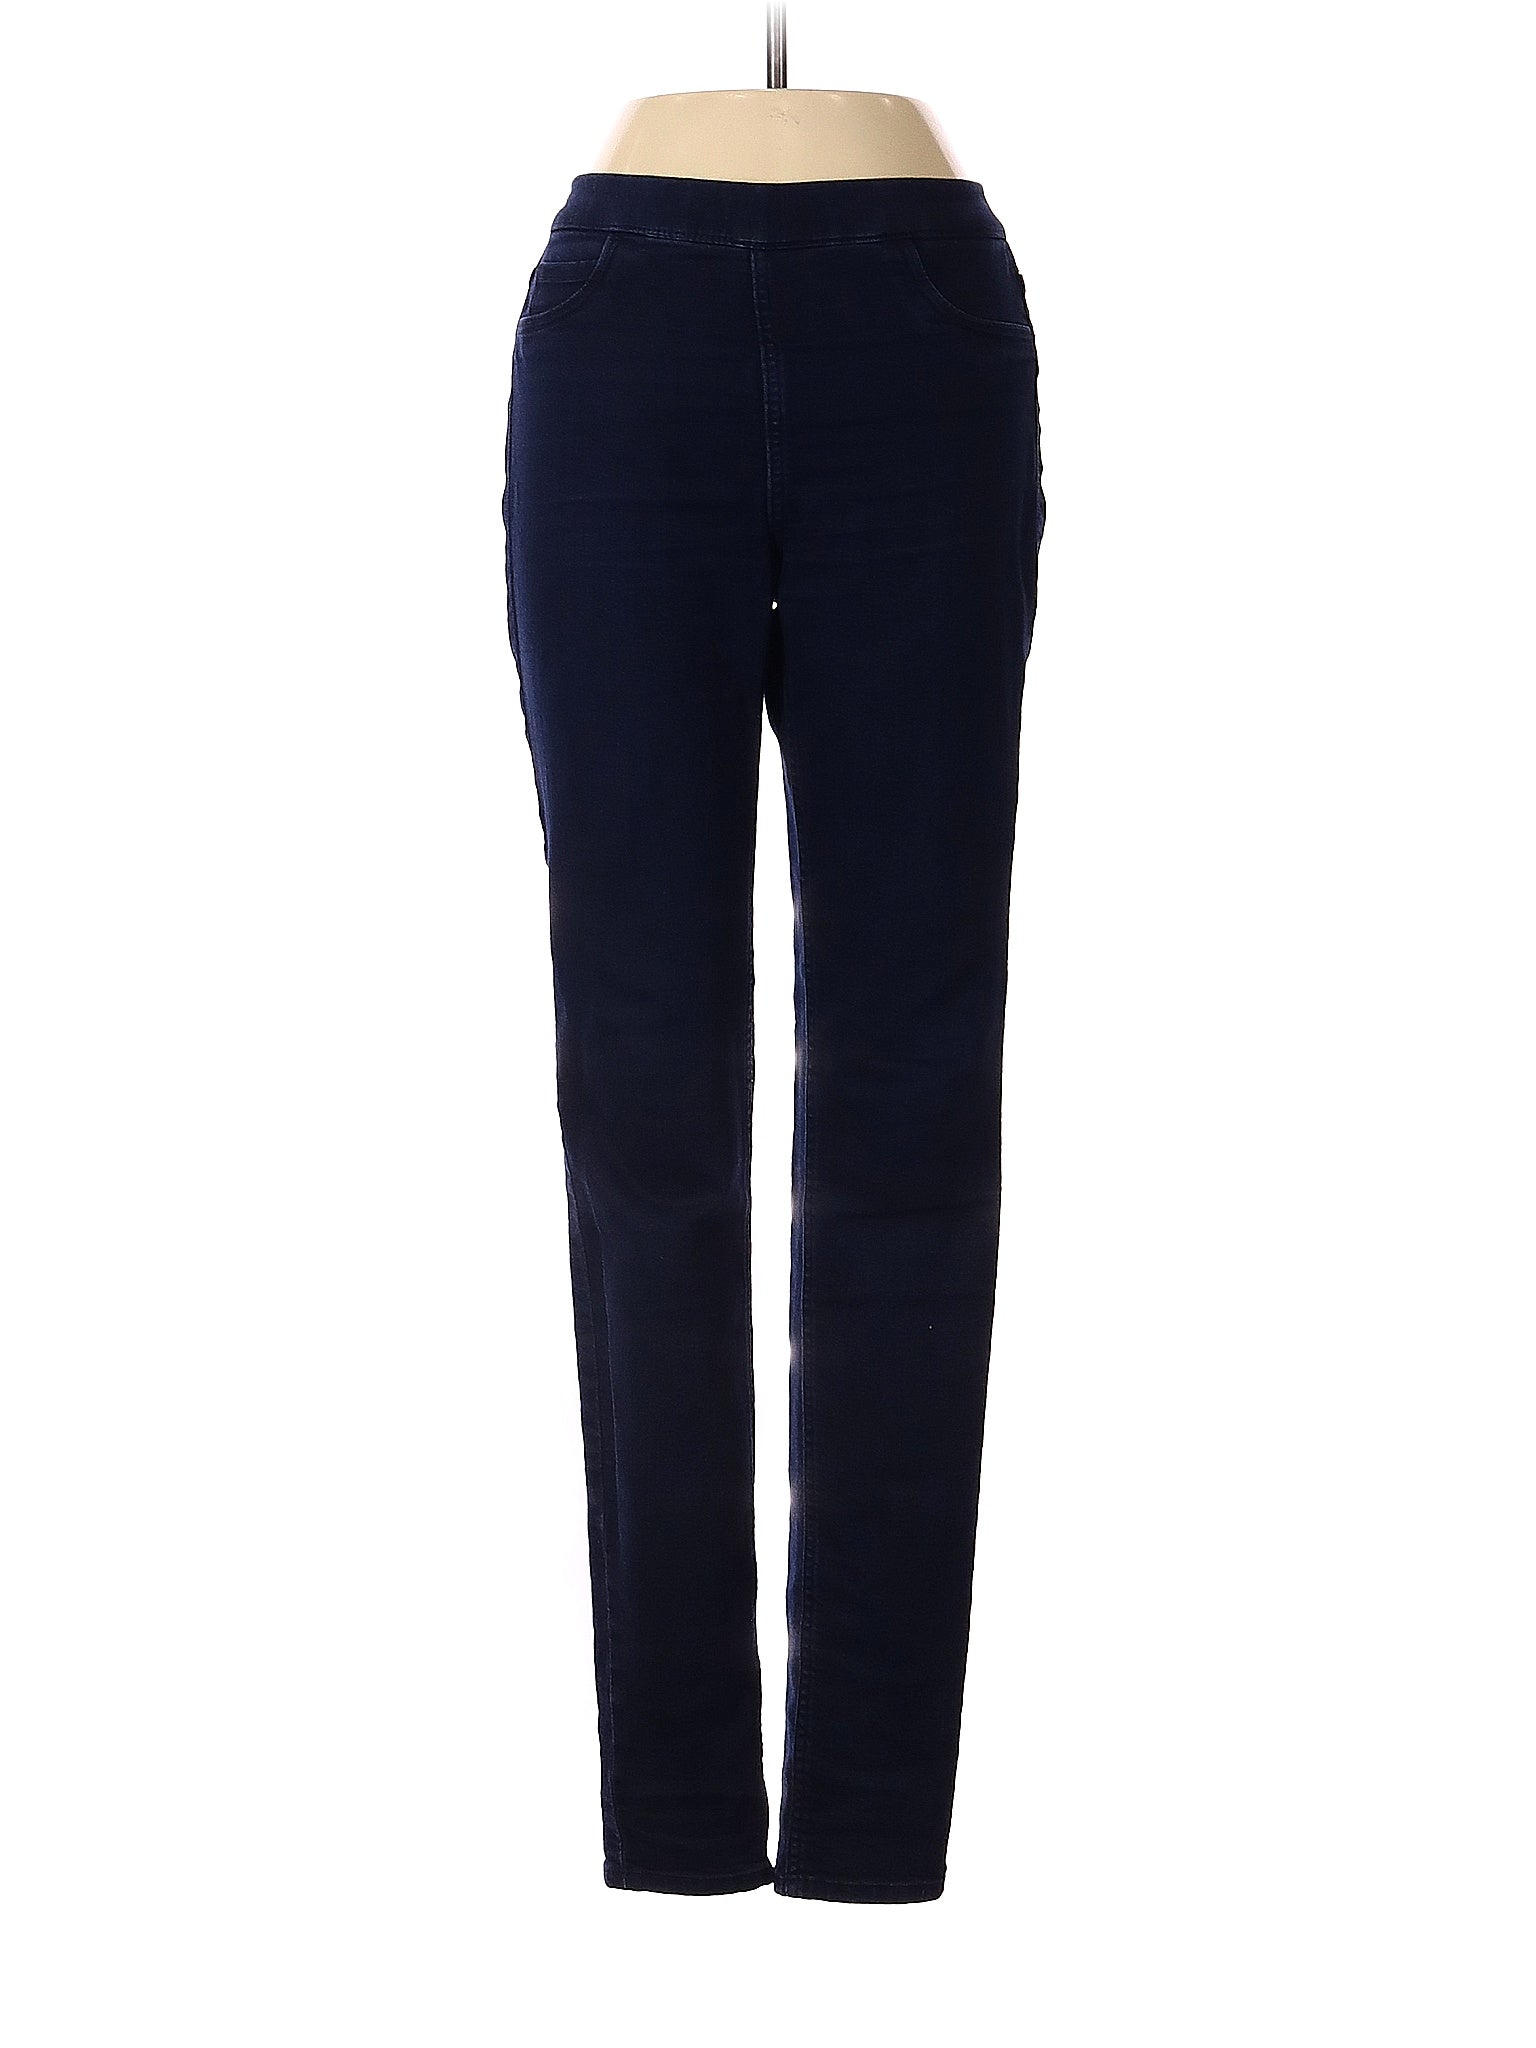 Jeggings size - 4